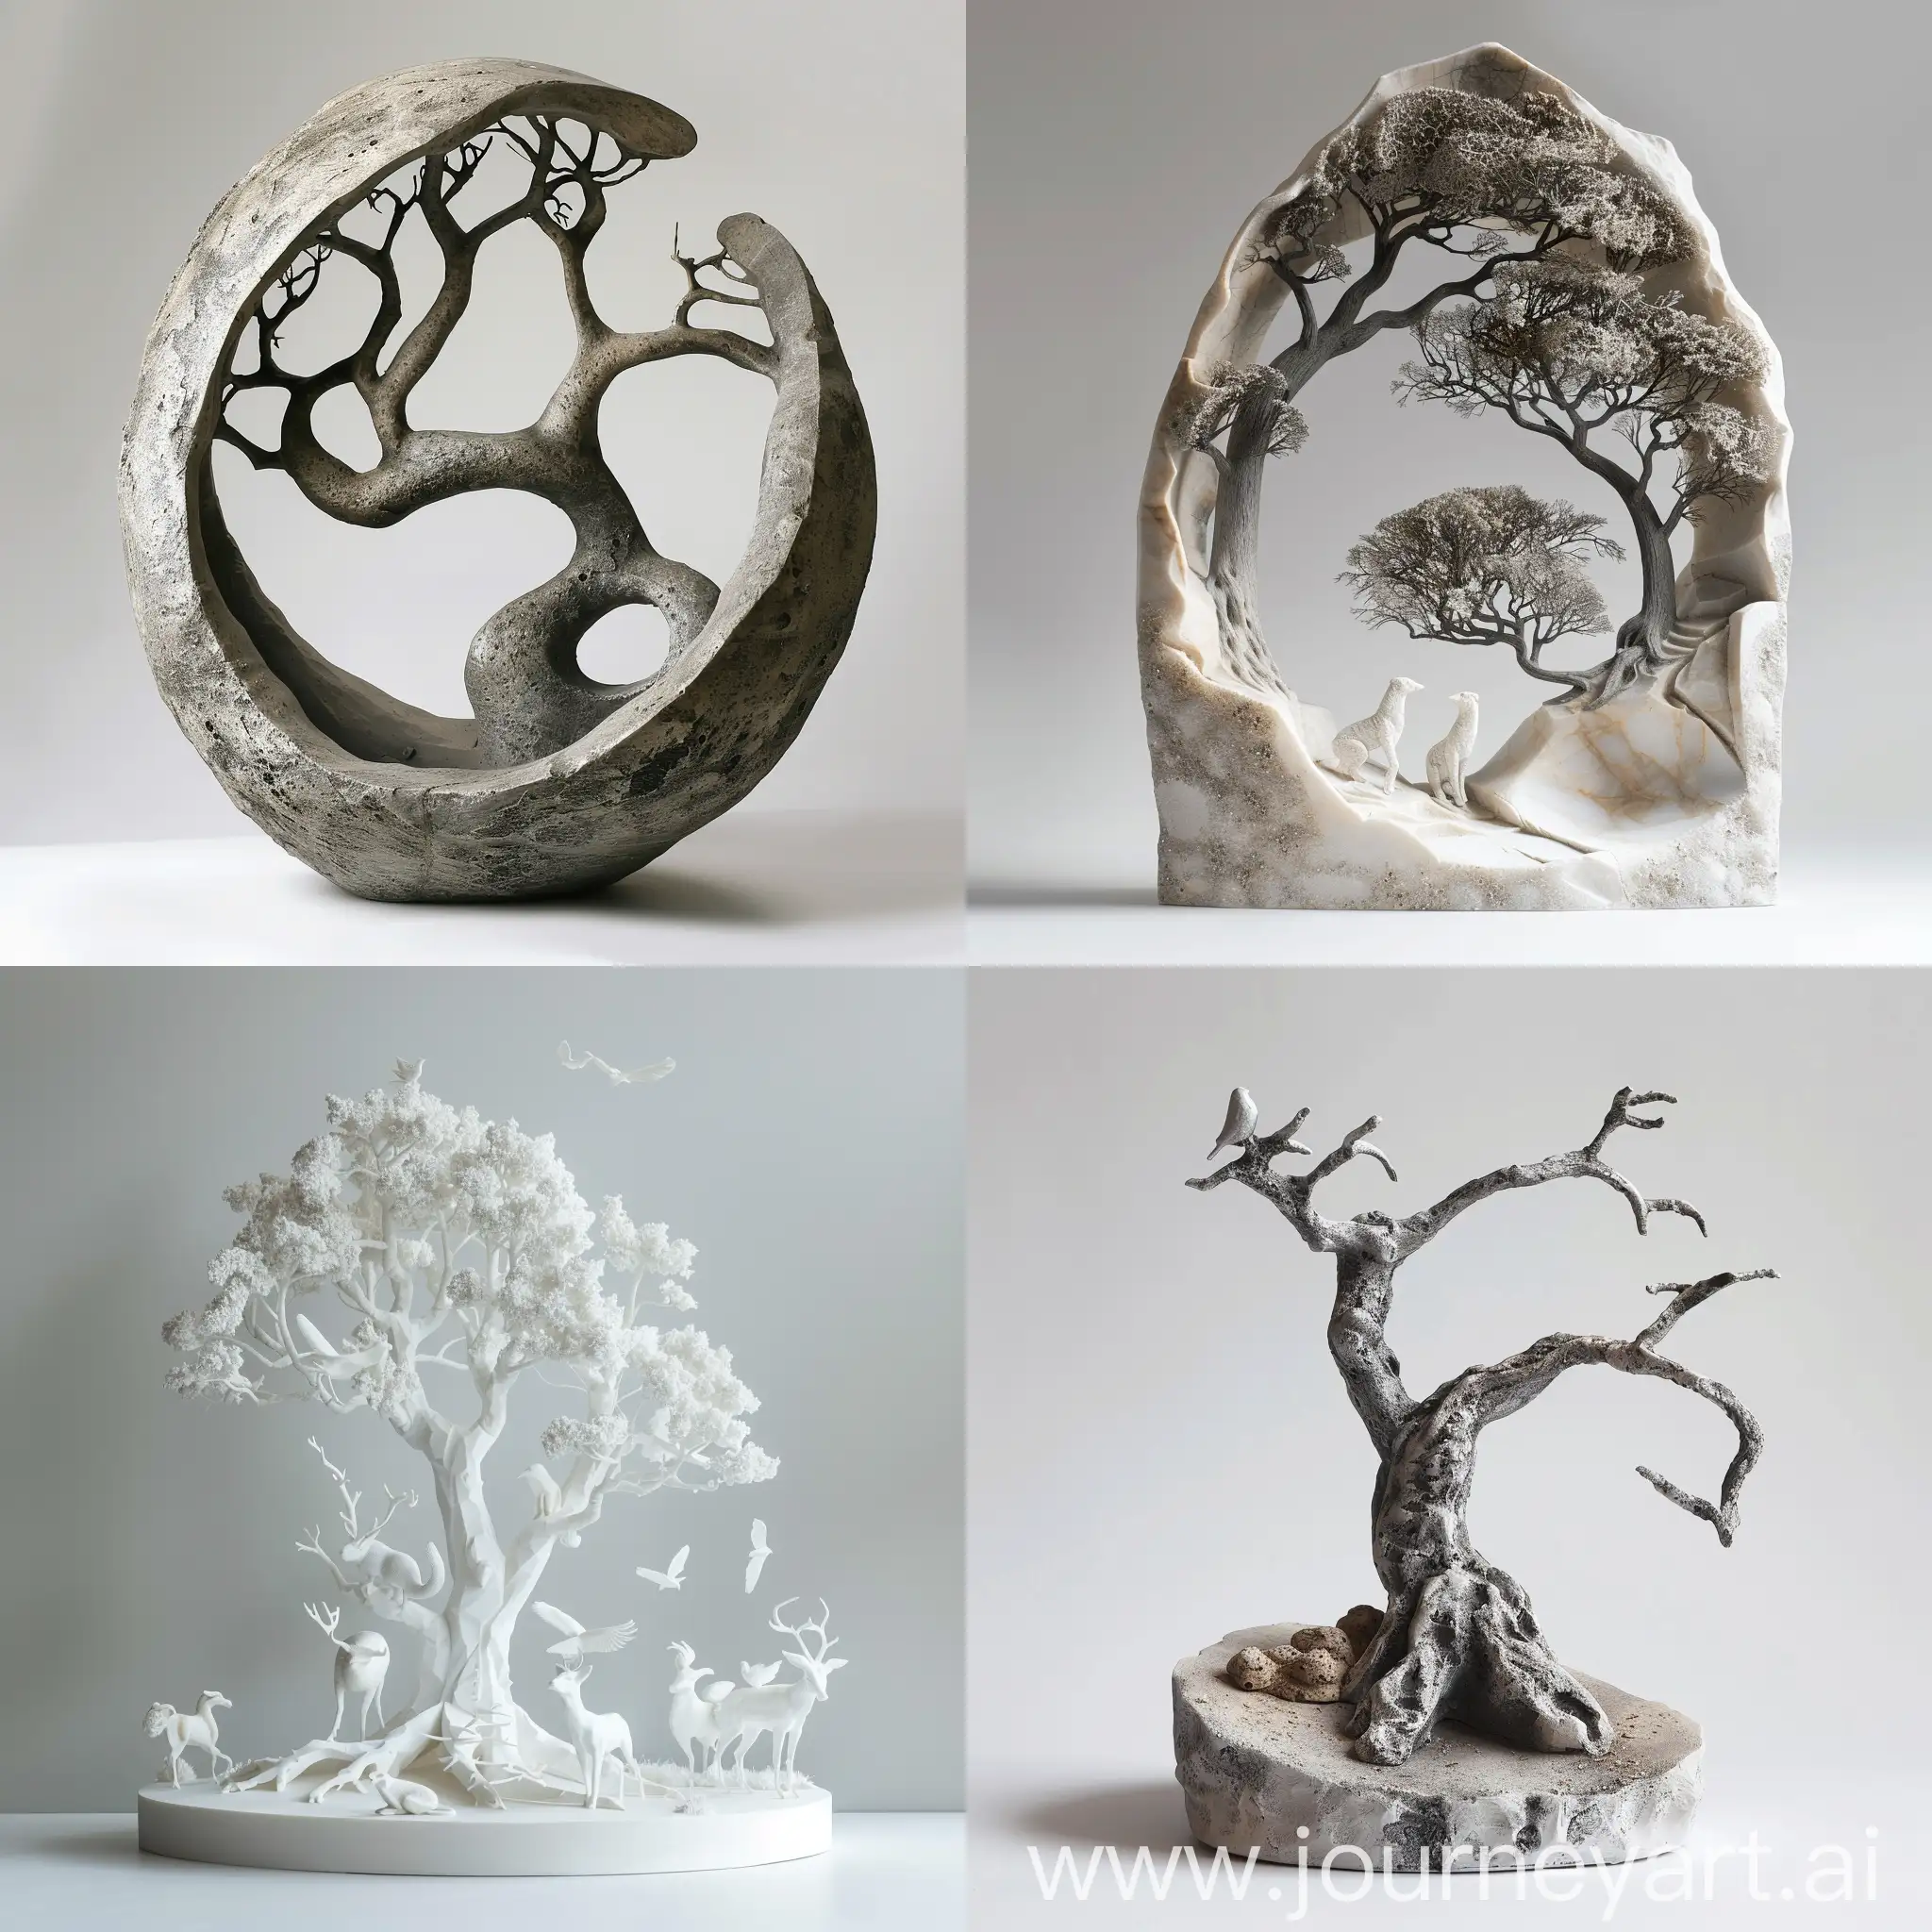 Minimalist-Nature-Sculpture-with-Trees-and-Animals